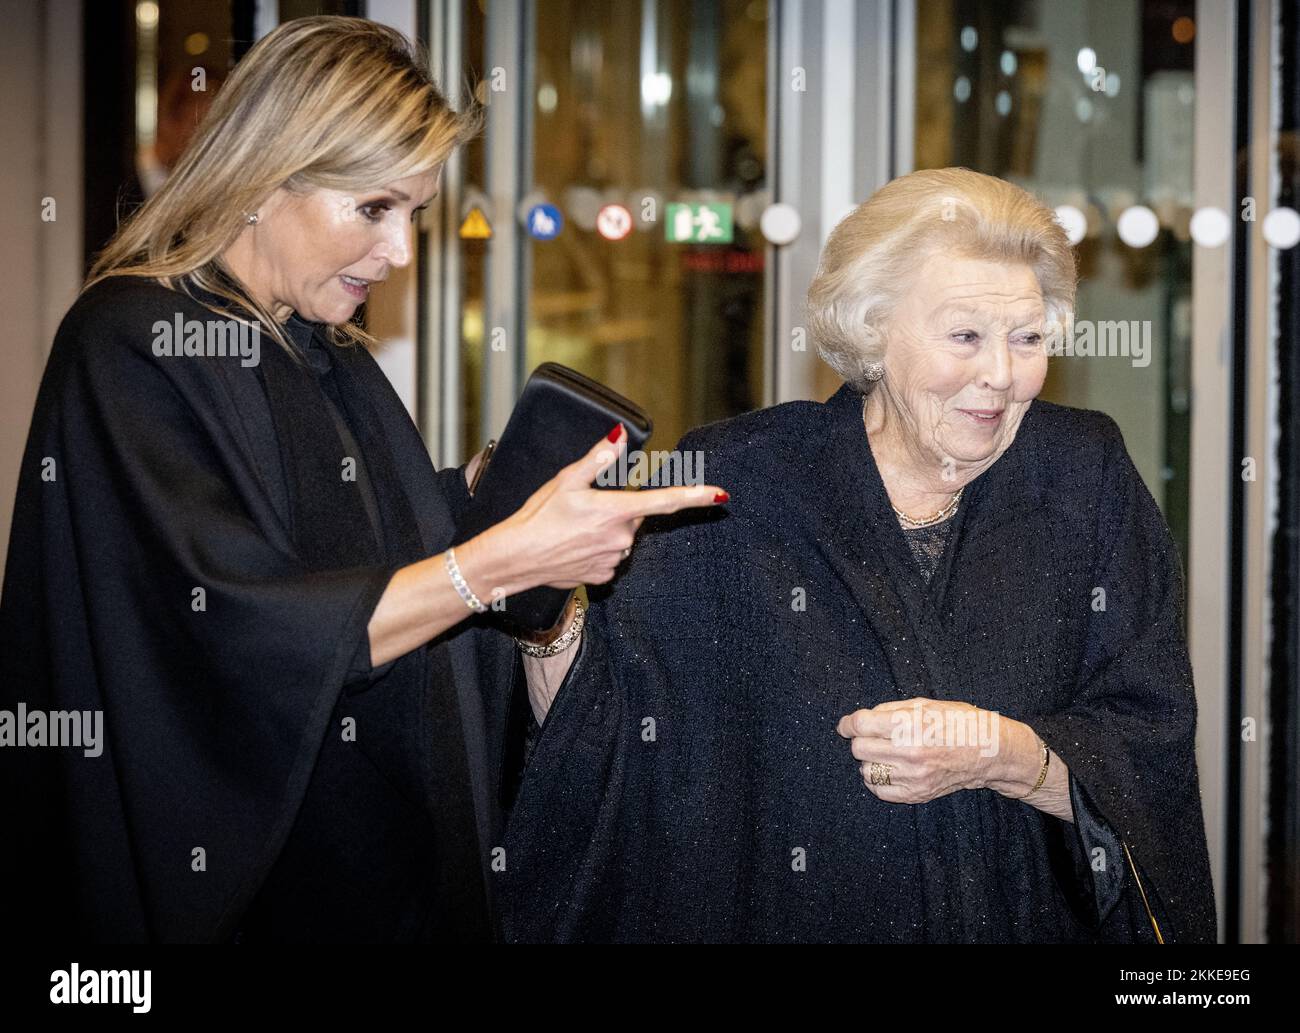 Amsterdam, Netherlands. 25th Nov, 2022. AMSTERDAM - Queen Maxima and Princess Beatrix depart from the Concertgebouw. They visited a concert by the Royal Concertgebouw Orchestra, conducted by the 26-year-old future chief conductor Klaus Makela. Queen Maxima is the patroness of the orchestra. ANP ROBIN UTRECHT netherlands out - belgium out Credit: ANP/Alamy Live News Stock Photo